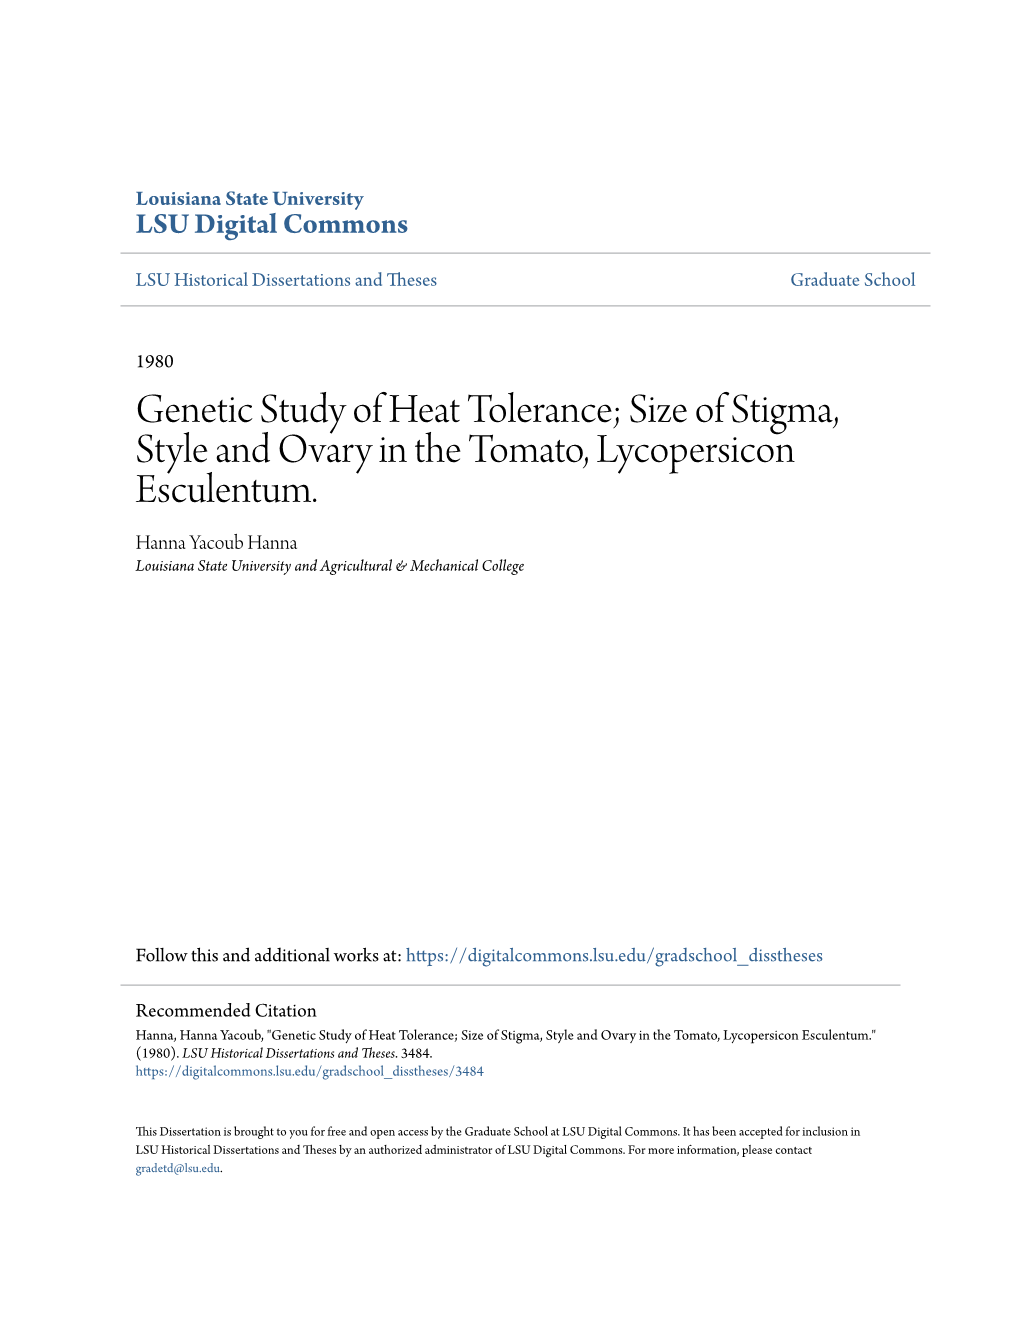 Genetic Study of Heat Tolerance; Size of Stigma, Style and Ovary in the Tomato, Lycopersicon Esculentum